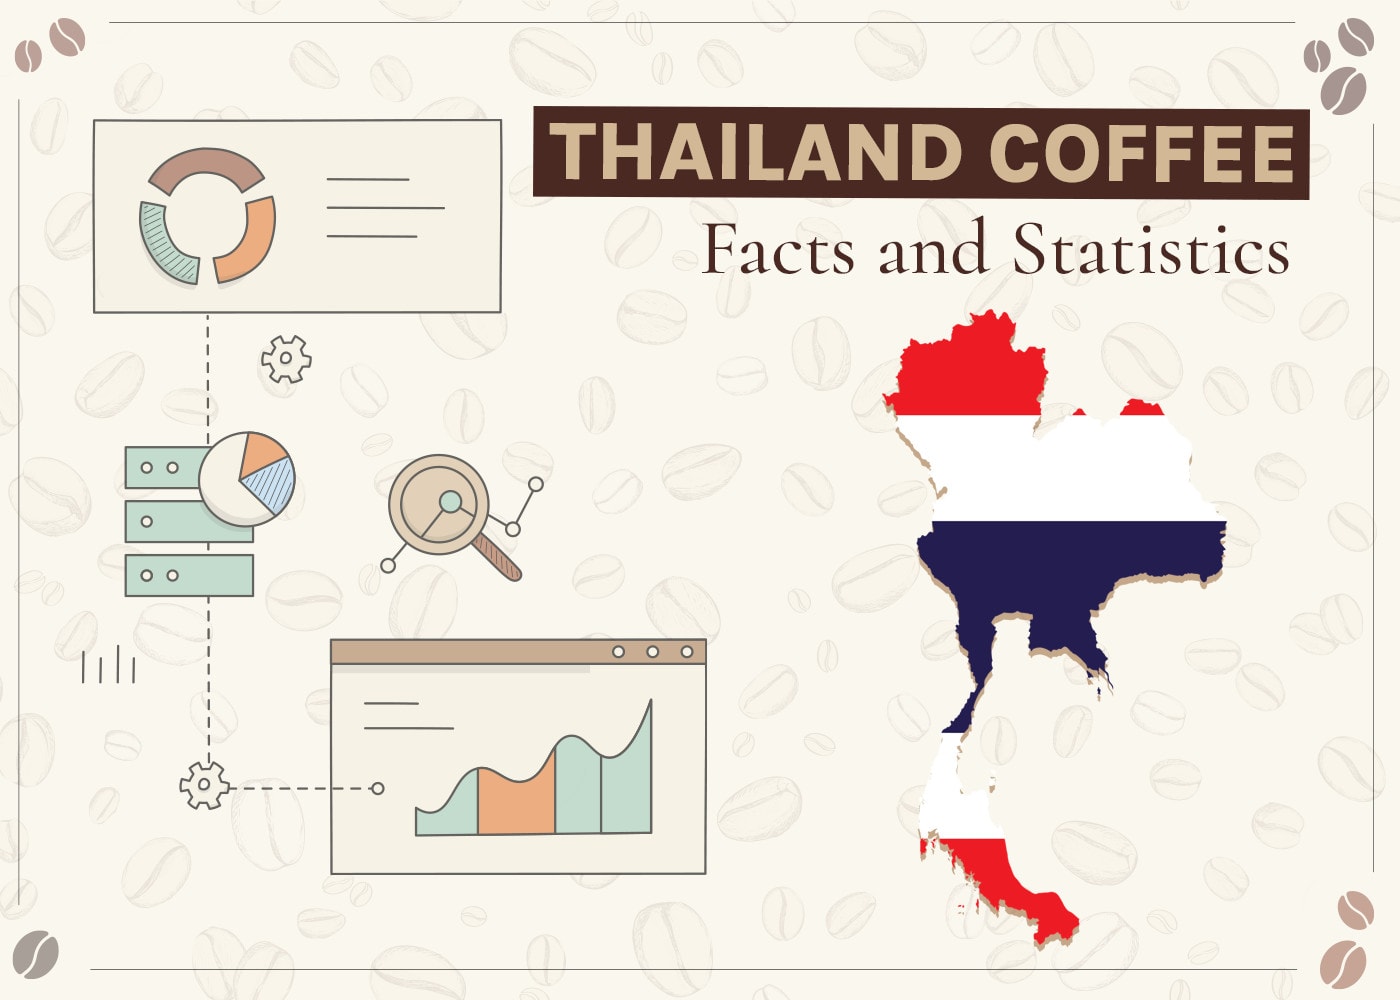 Thailand Coffee Consumption Statistics & Facts to Know